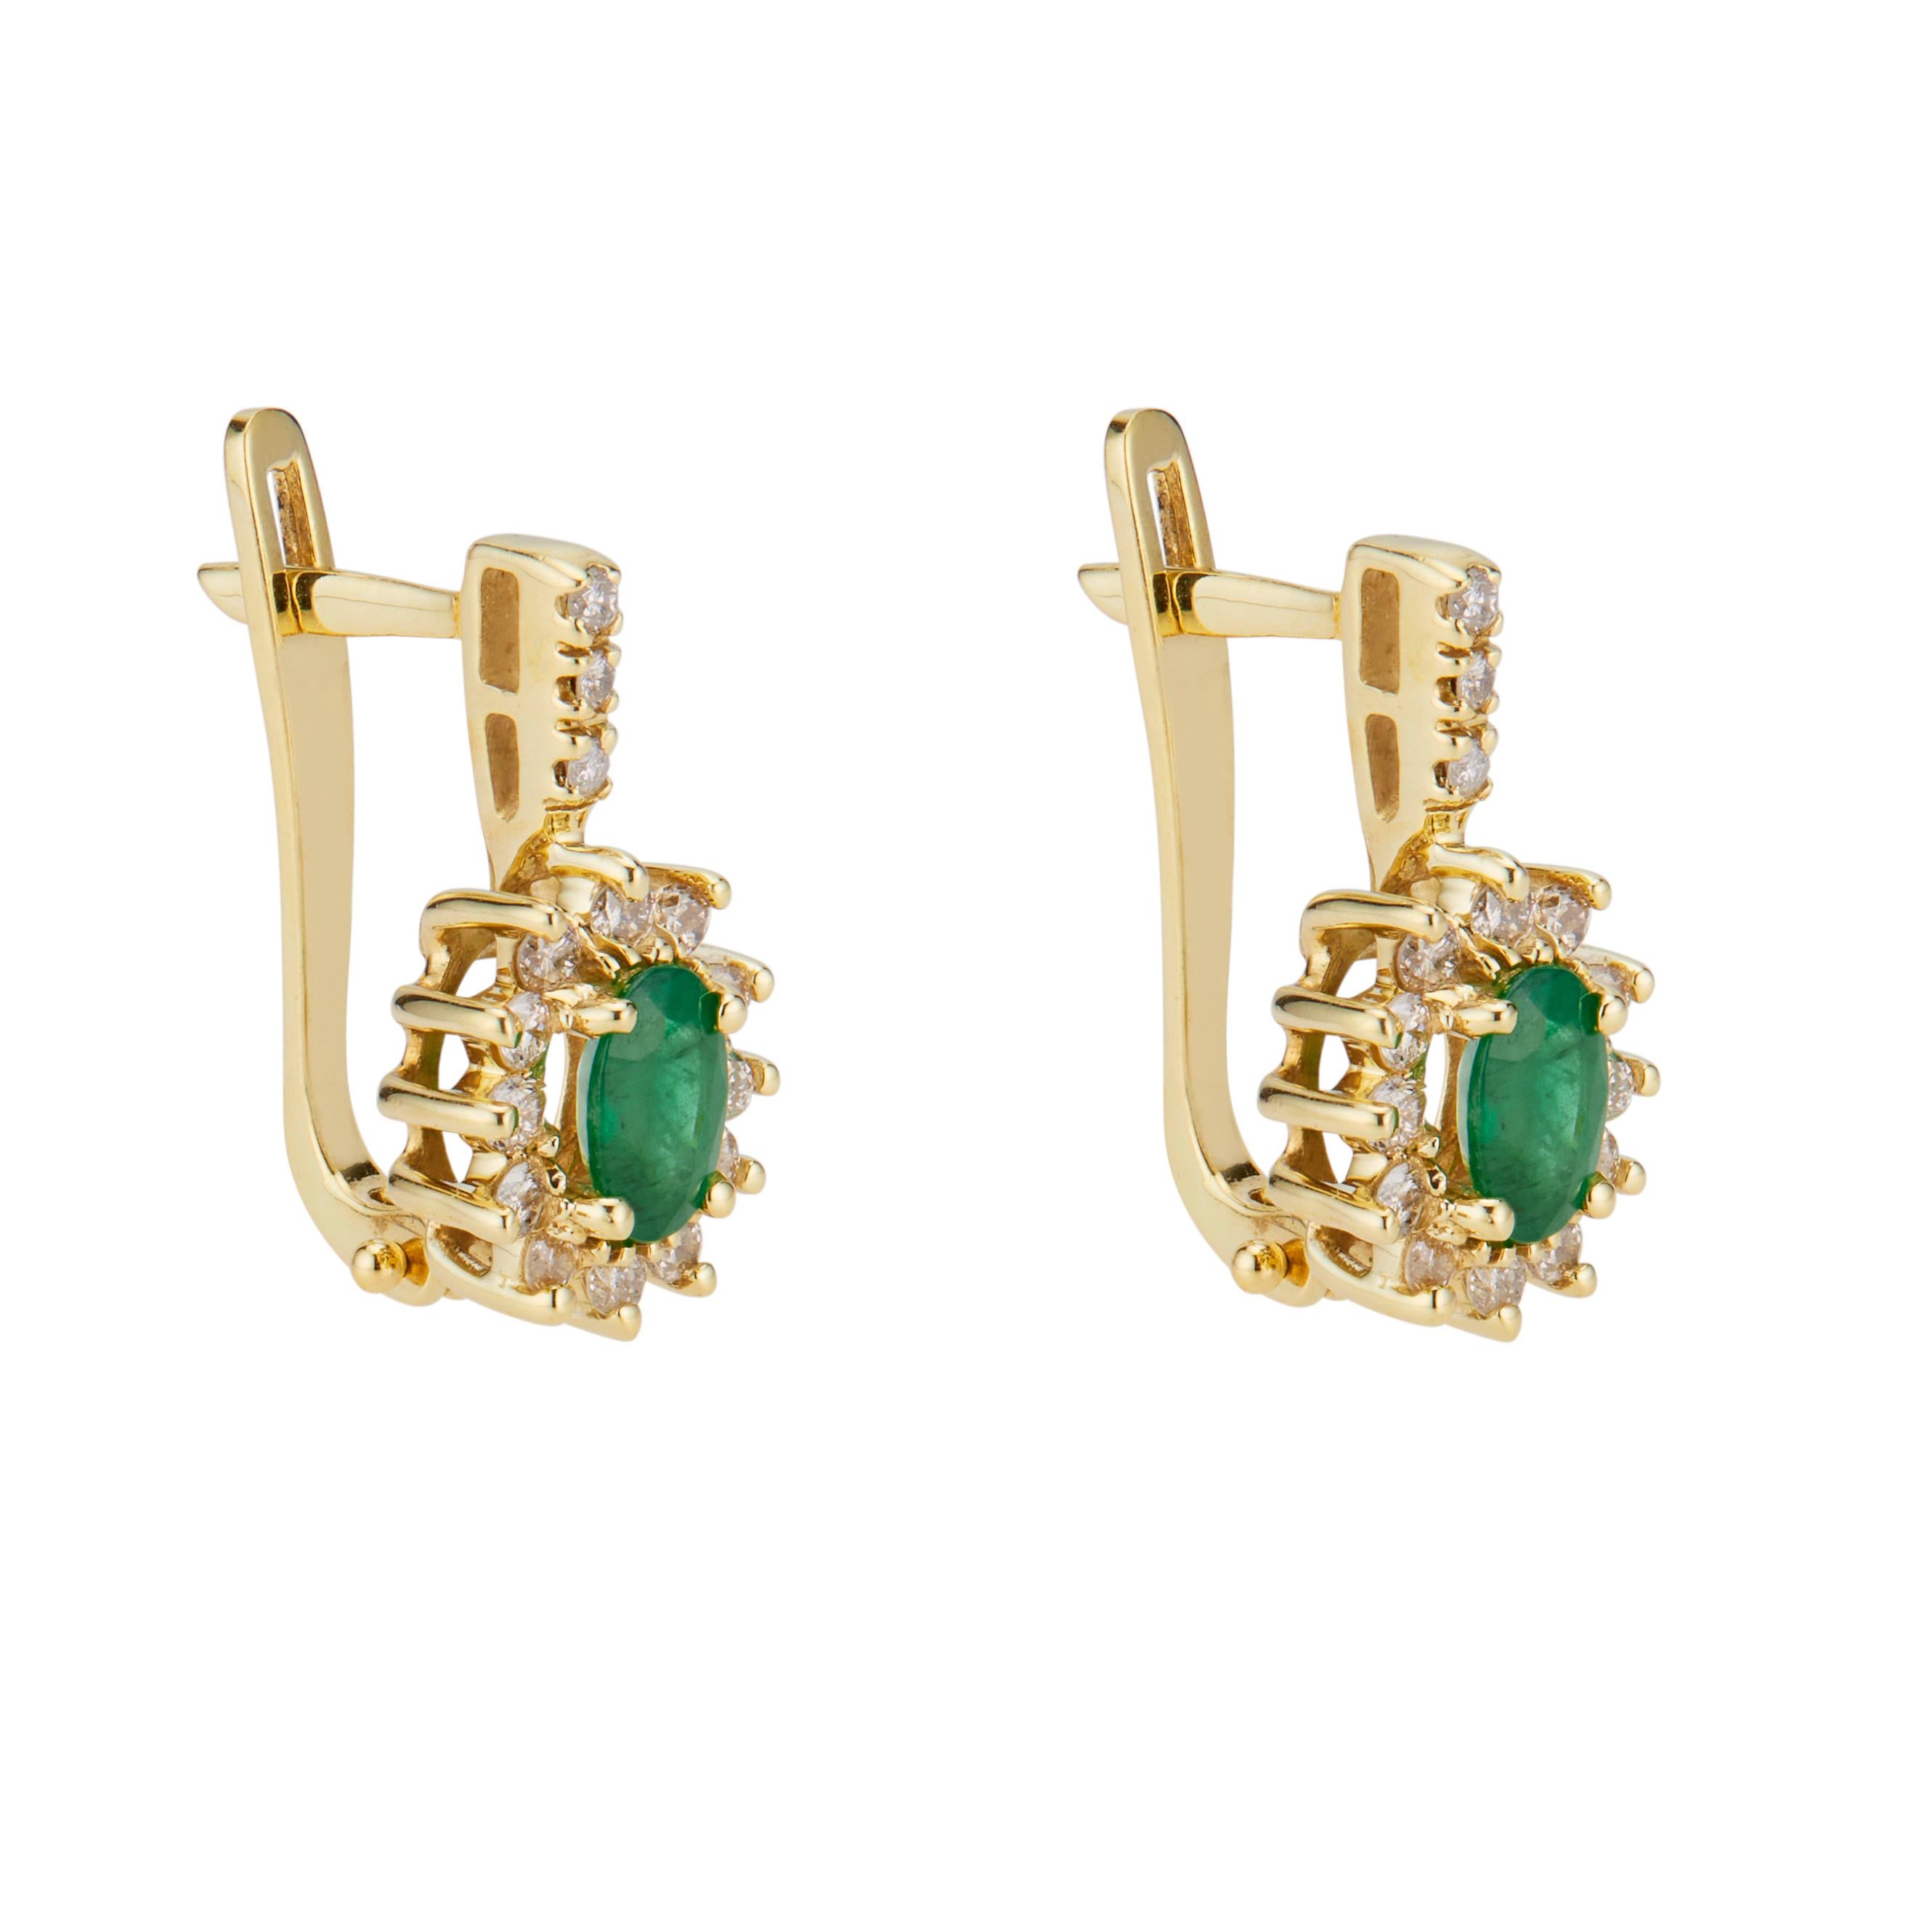 Vintage 1960's oval emerald and diamond earrings. 2 oval emeralds, each with a halo of round brilliant cut diamonds set in 14k yellow gold. Lever backs.  

2 oval green emeralds, approx. 1.00cts
30 round brilliant cut diamonds, I-J SI approx. .38cts